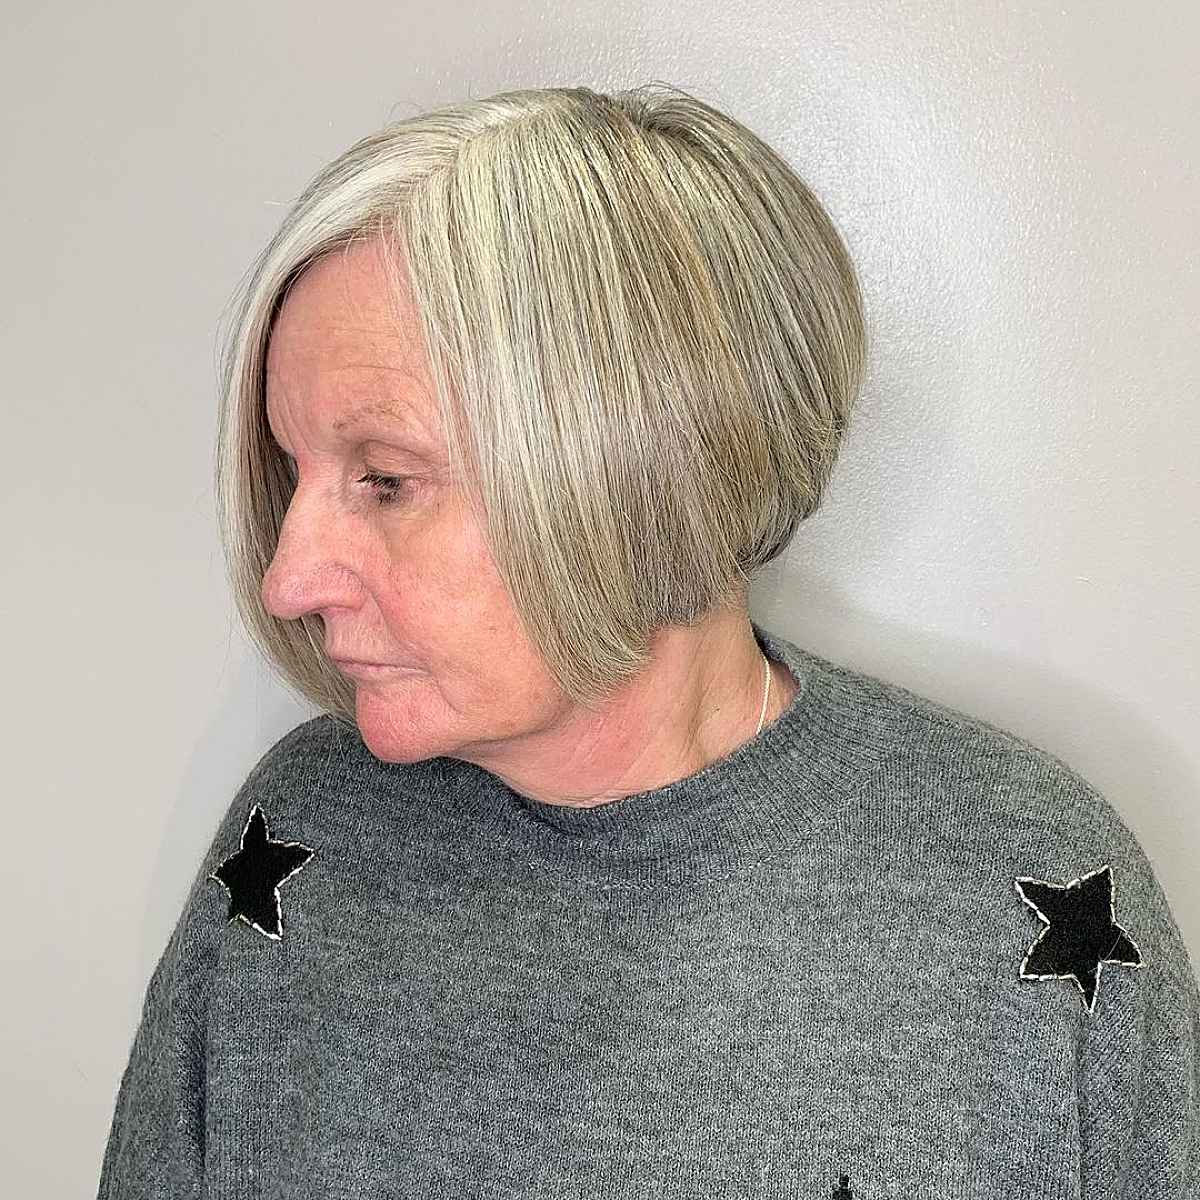 Classic Angled Bob for Fine Hair for ladies in their 60s